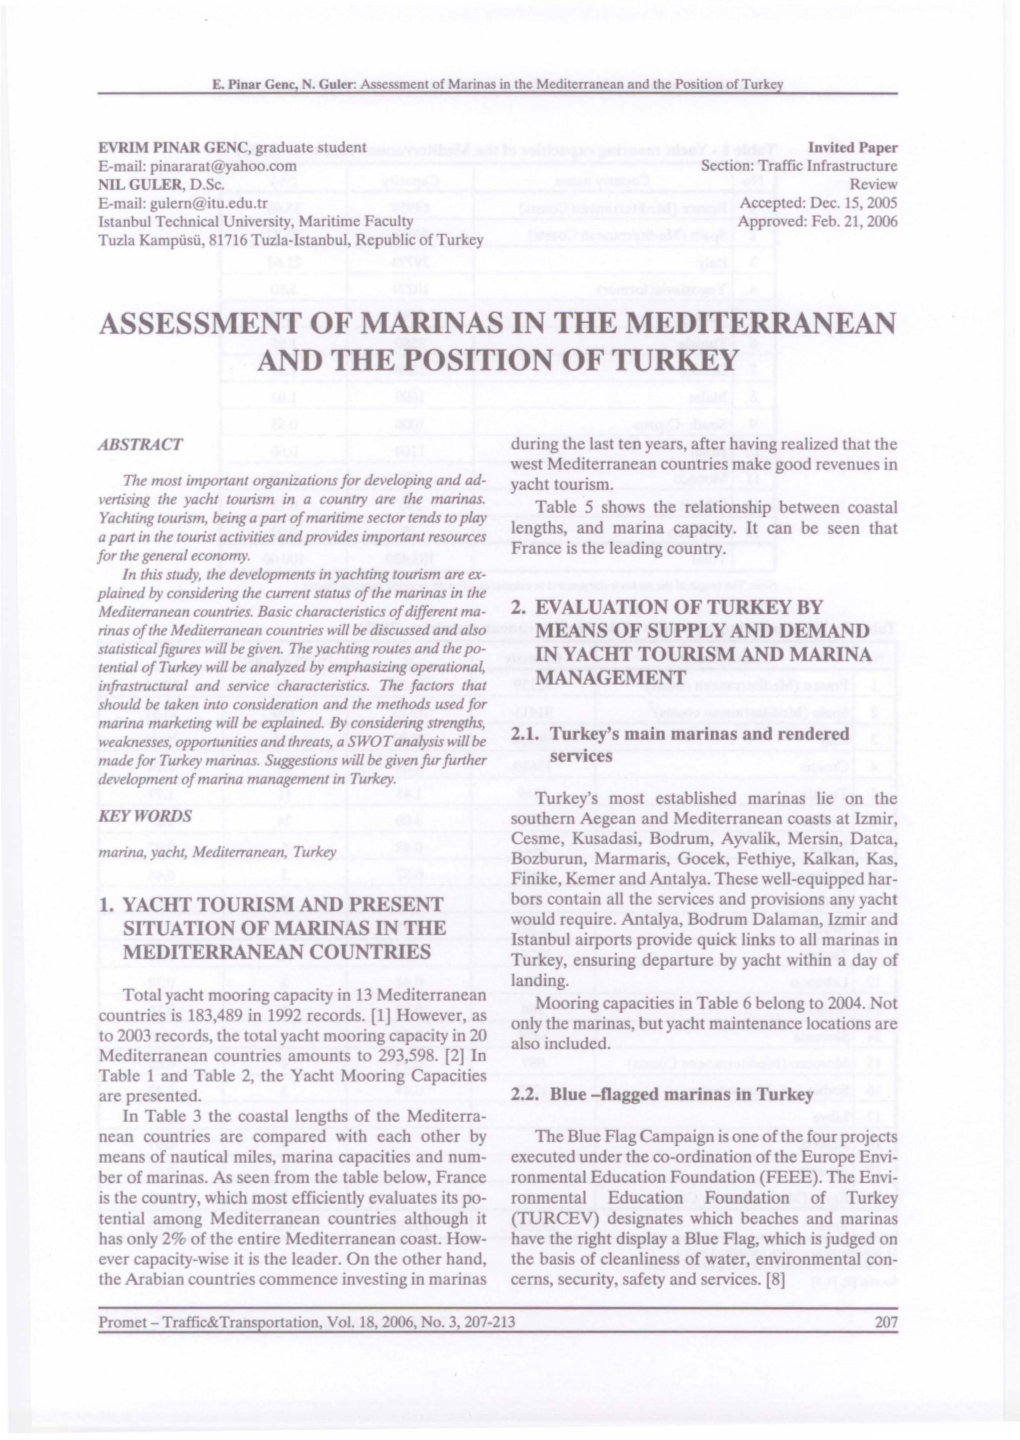 Assessment of Marinas in the Mediterranean and the Position of Turkey